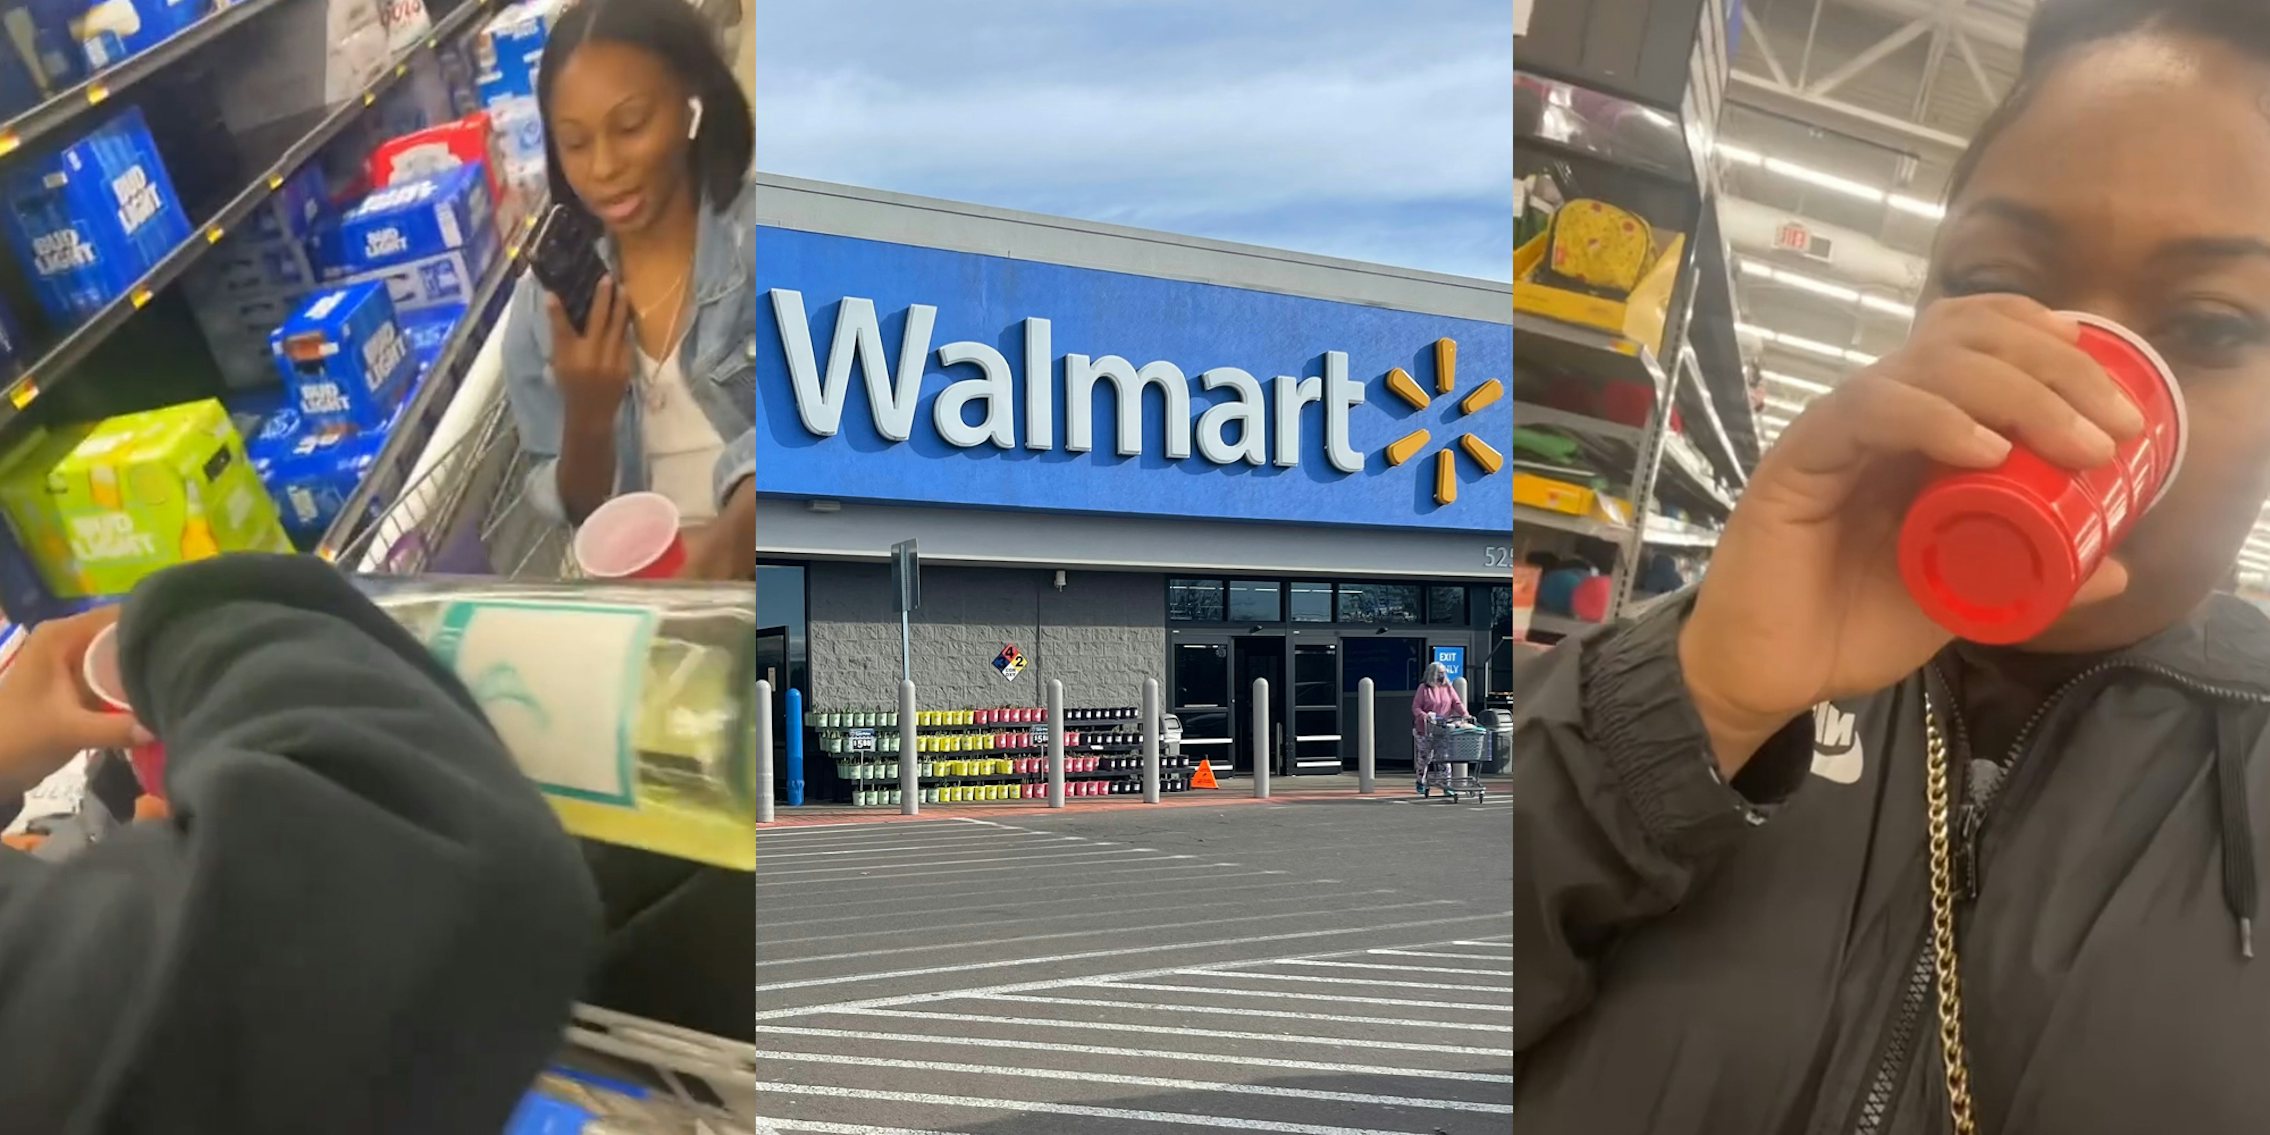 Walmart customers pouring wine into cups (l) Walmart sign on building (c) Walmart customer drinking (r)